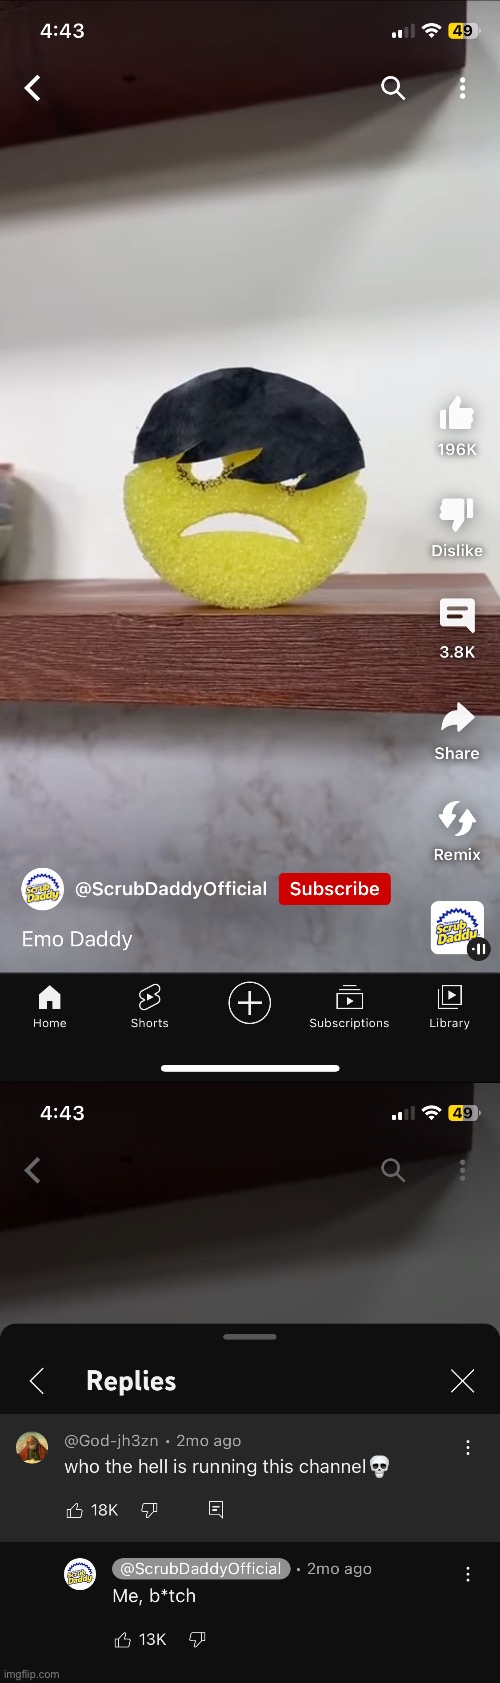 Scrub daddy | image tagged in memes | made w/ Imgflip meme maker